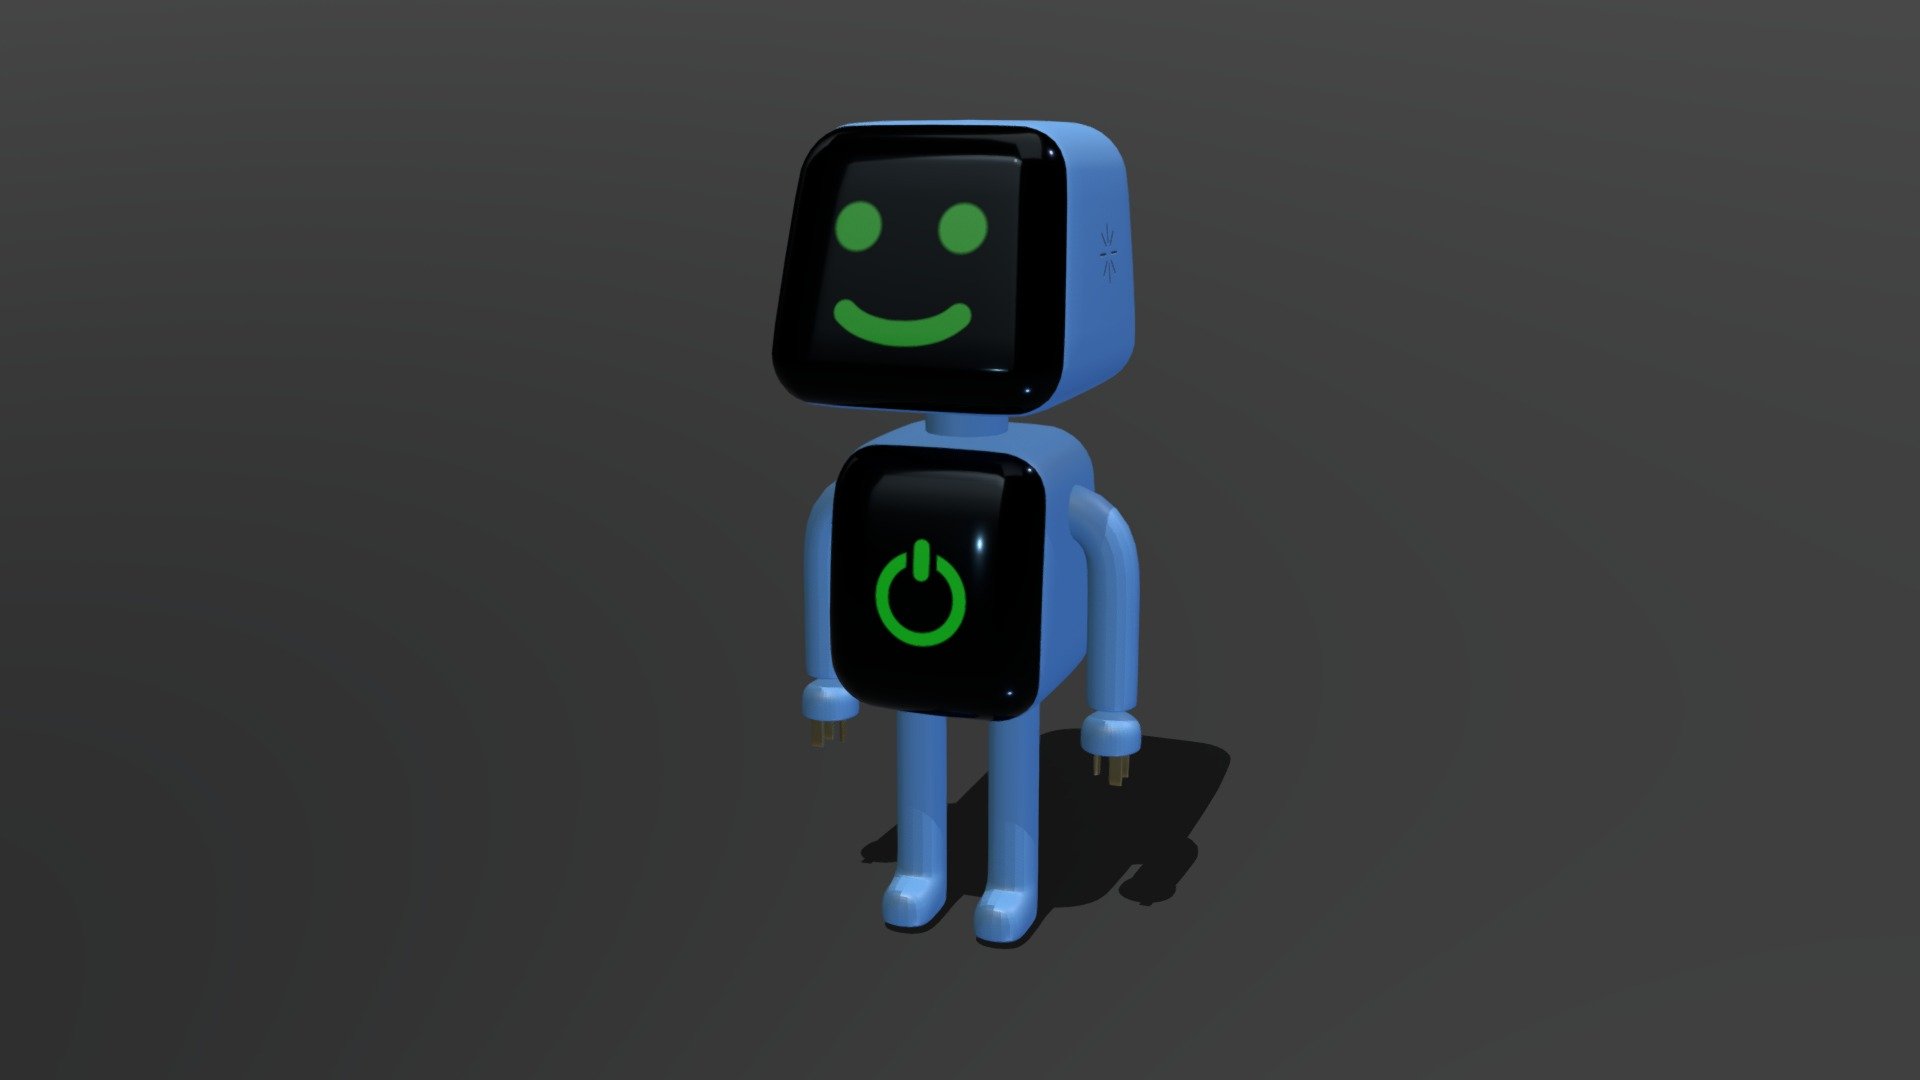 I-Bot is an AI companion to keep you company. With touch screens and voice commands, I-Bot allows endless interaction, speaks any language, can help you with homework, and even jams with you. It is truly limitless.

This little guy was originally made in 2d to be included in an animation but i later decided to make it a 3D model. 
created using Maya and textured using Substance Painter 3d model